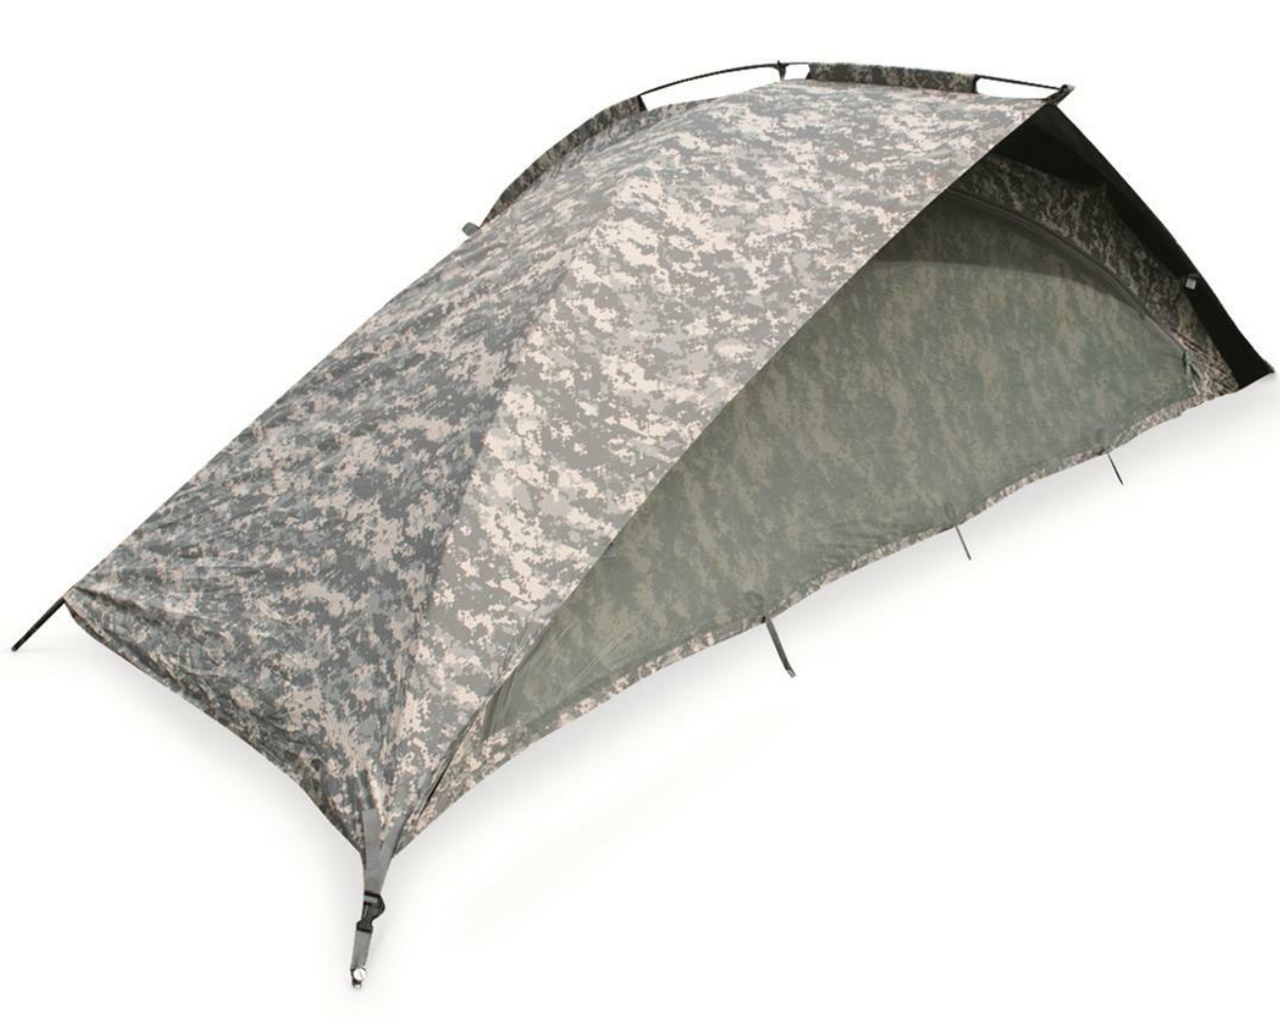 U.S. Military Surplus Improved Combat Shelter Tent - Military Depot